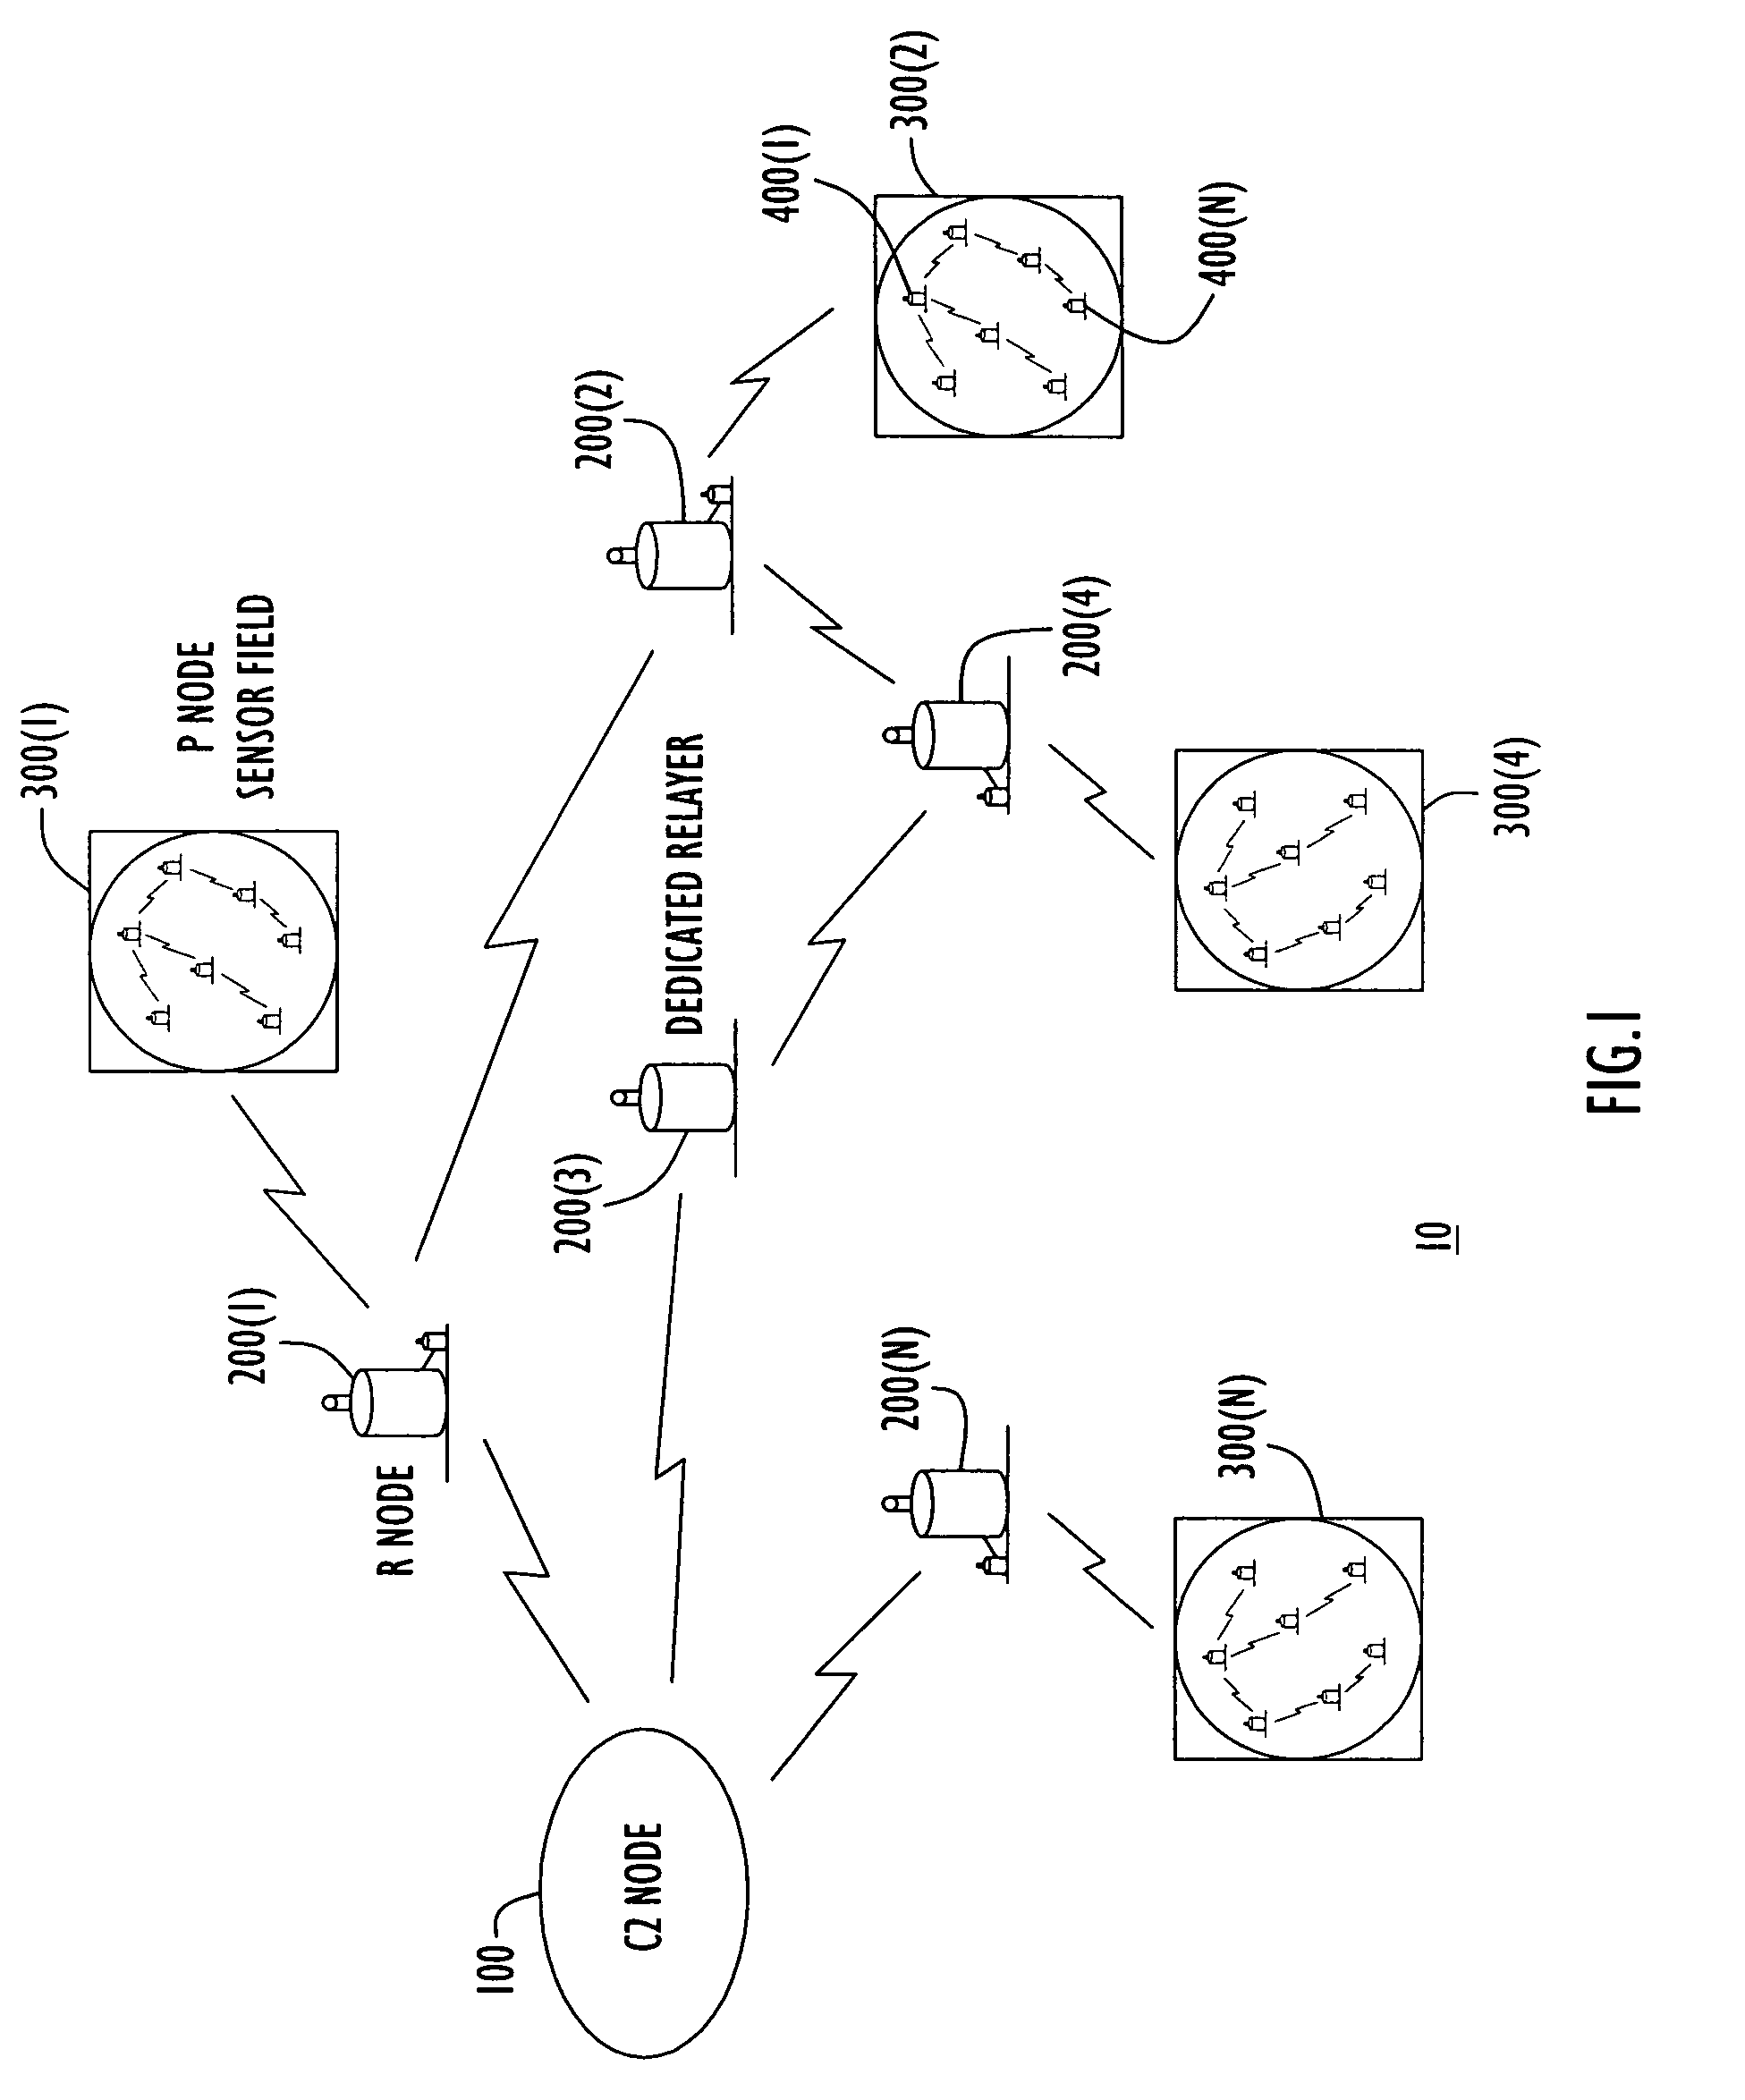 Energy-efficient network protocol and node device for sensor networks